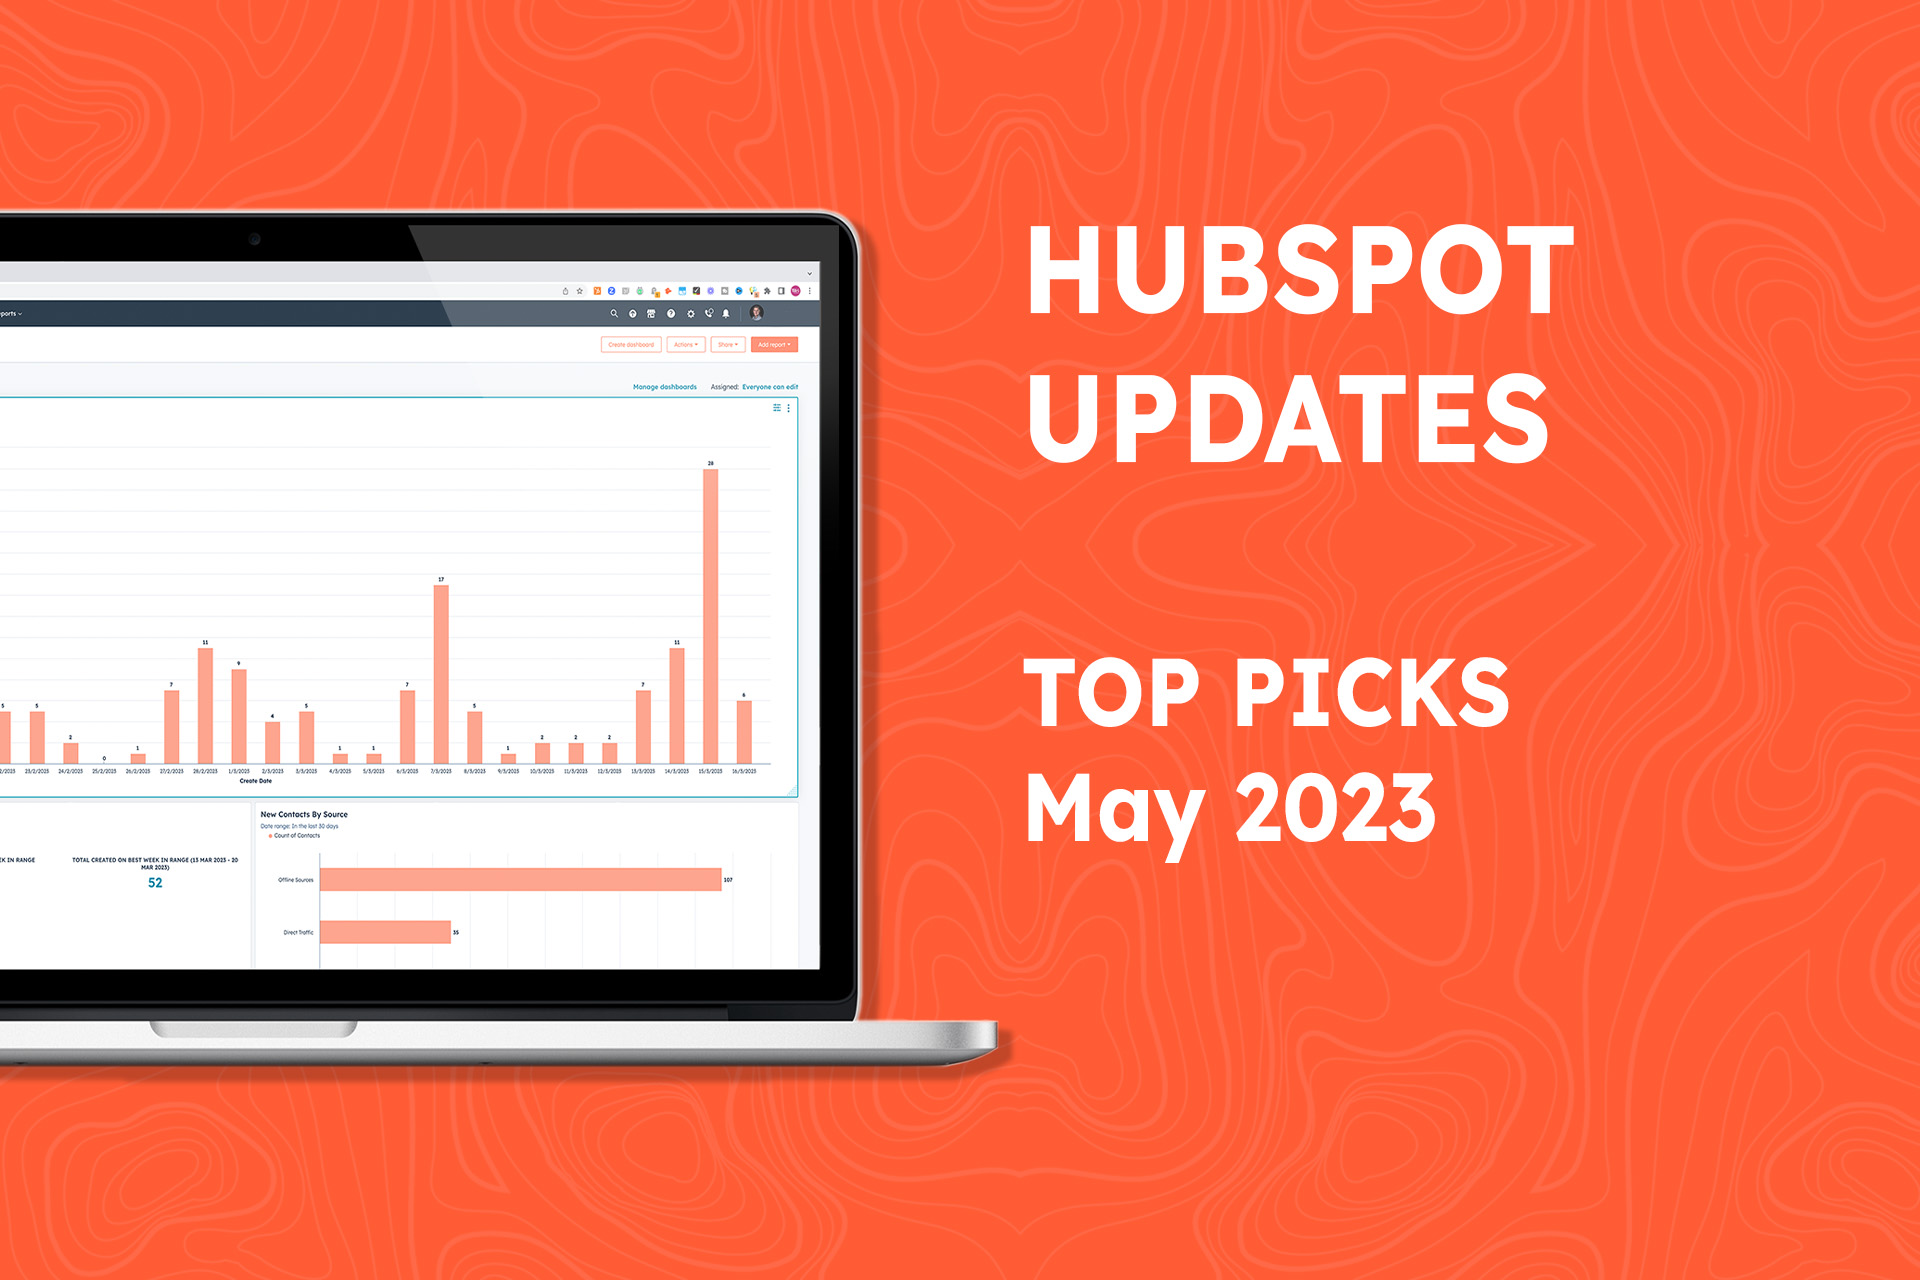 Hubspot Updates: Our Top Picks - May 2023